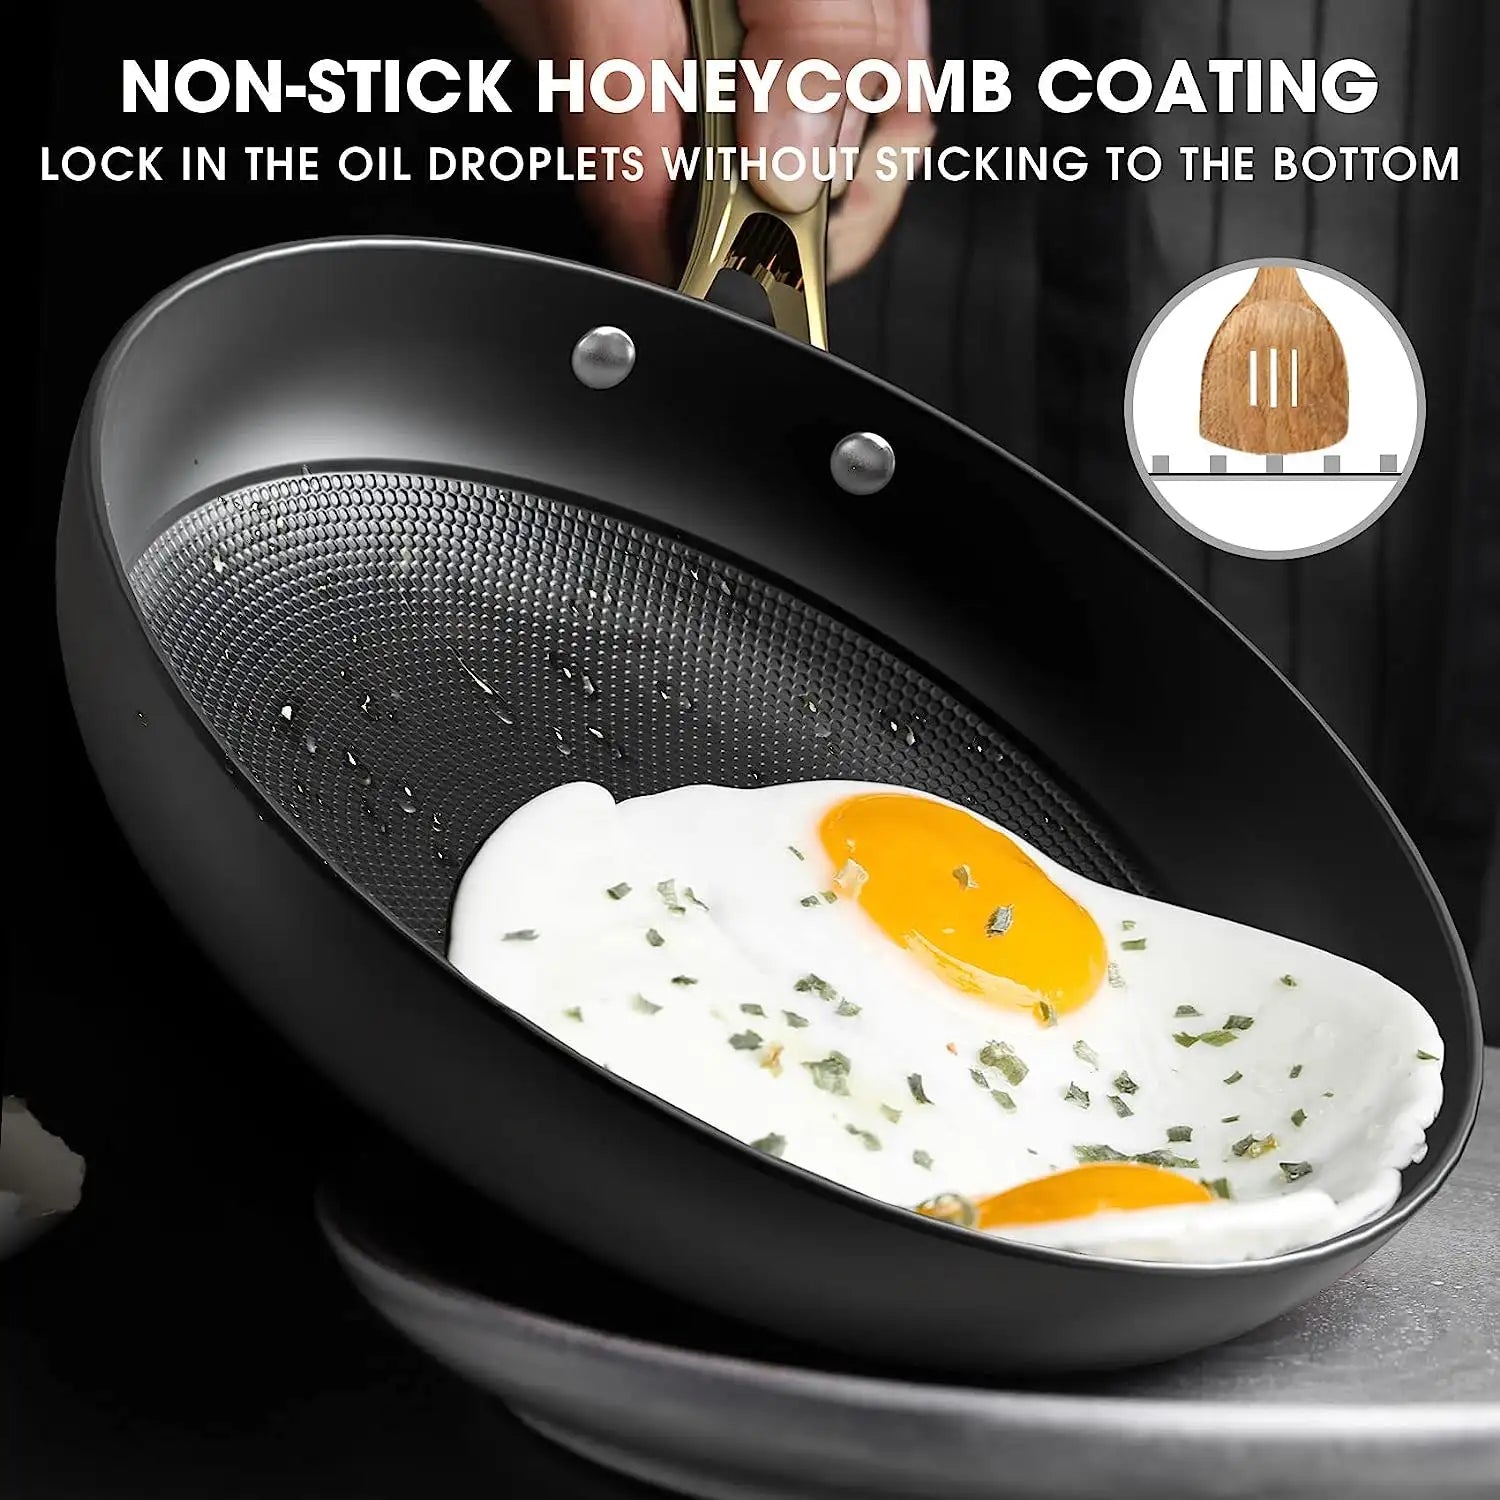 Cast Iron Frying Pans with Lid